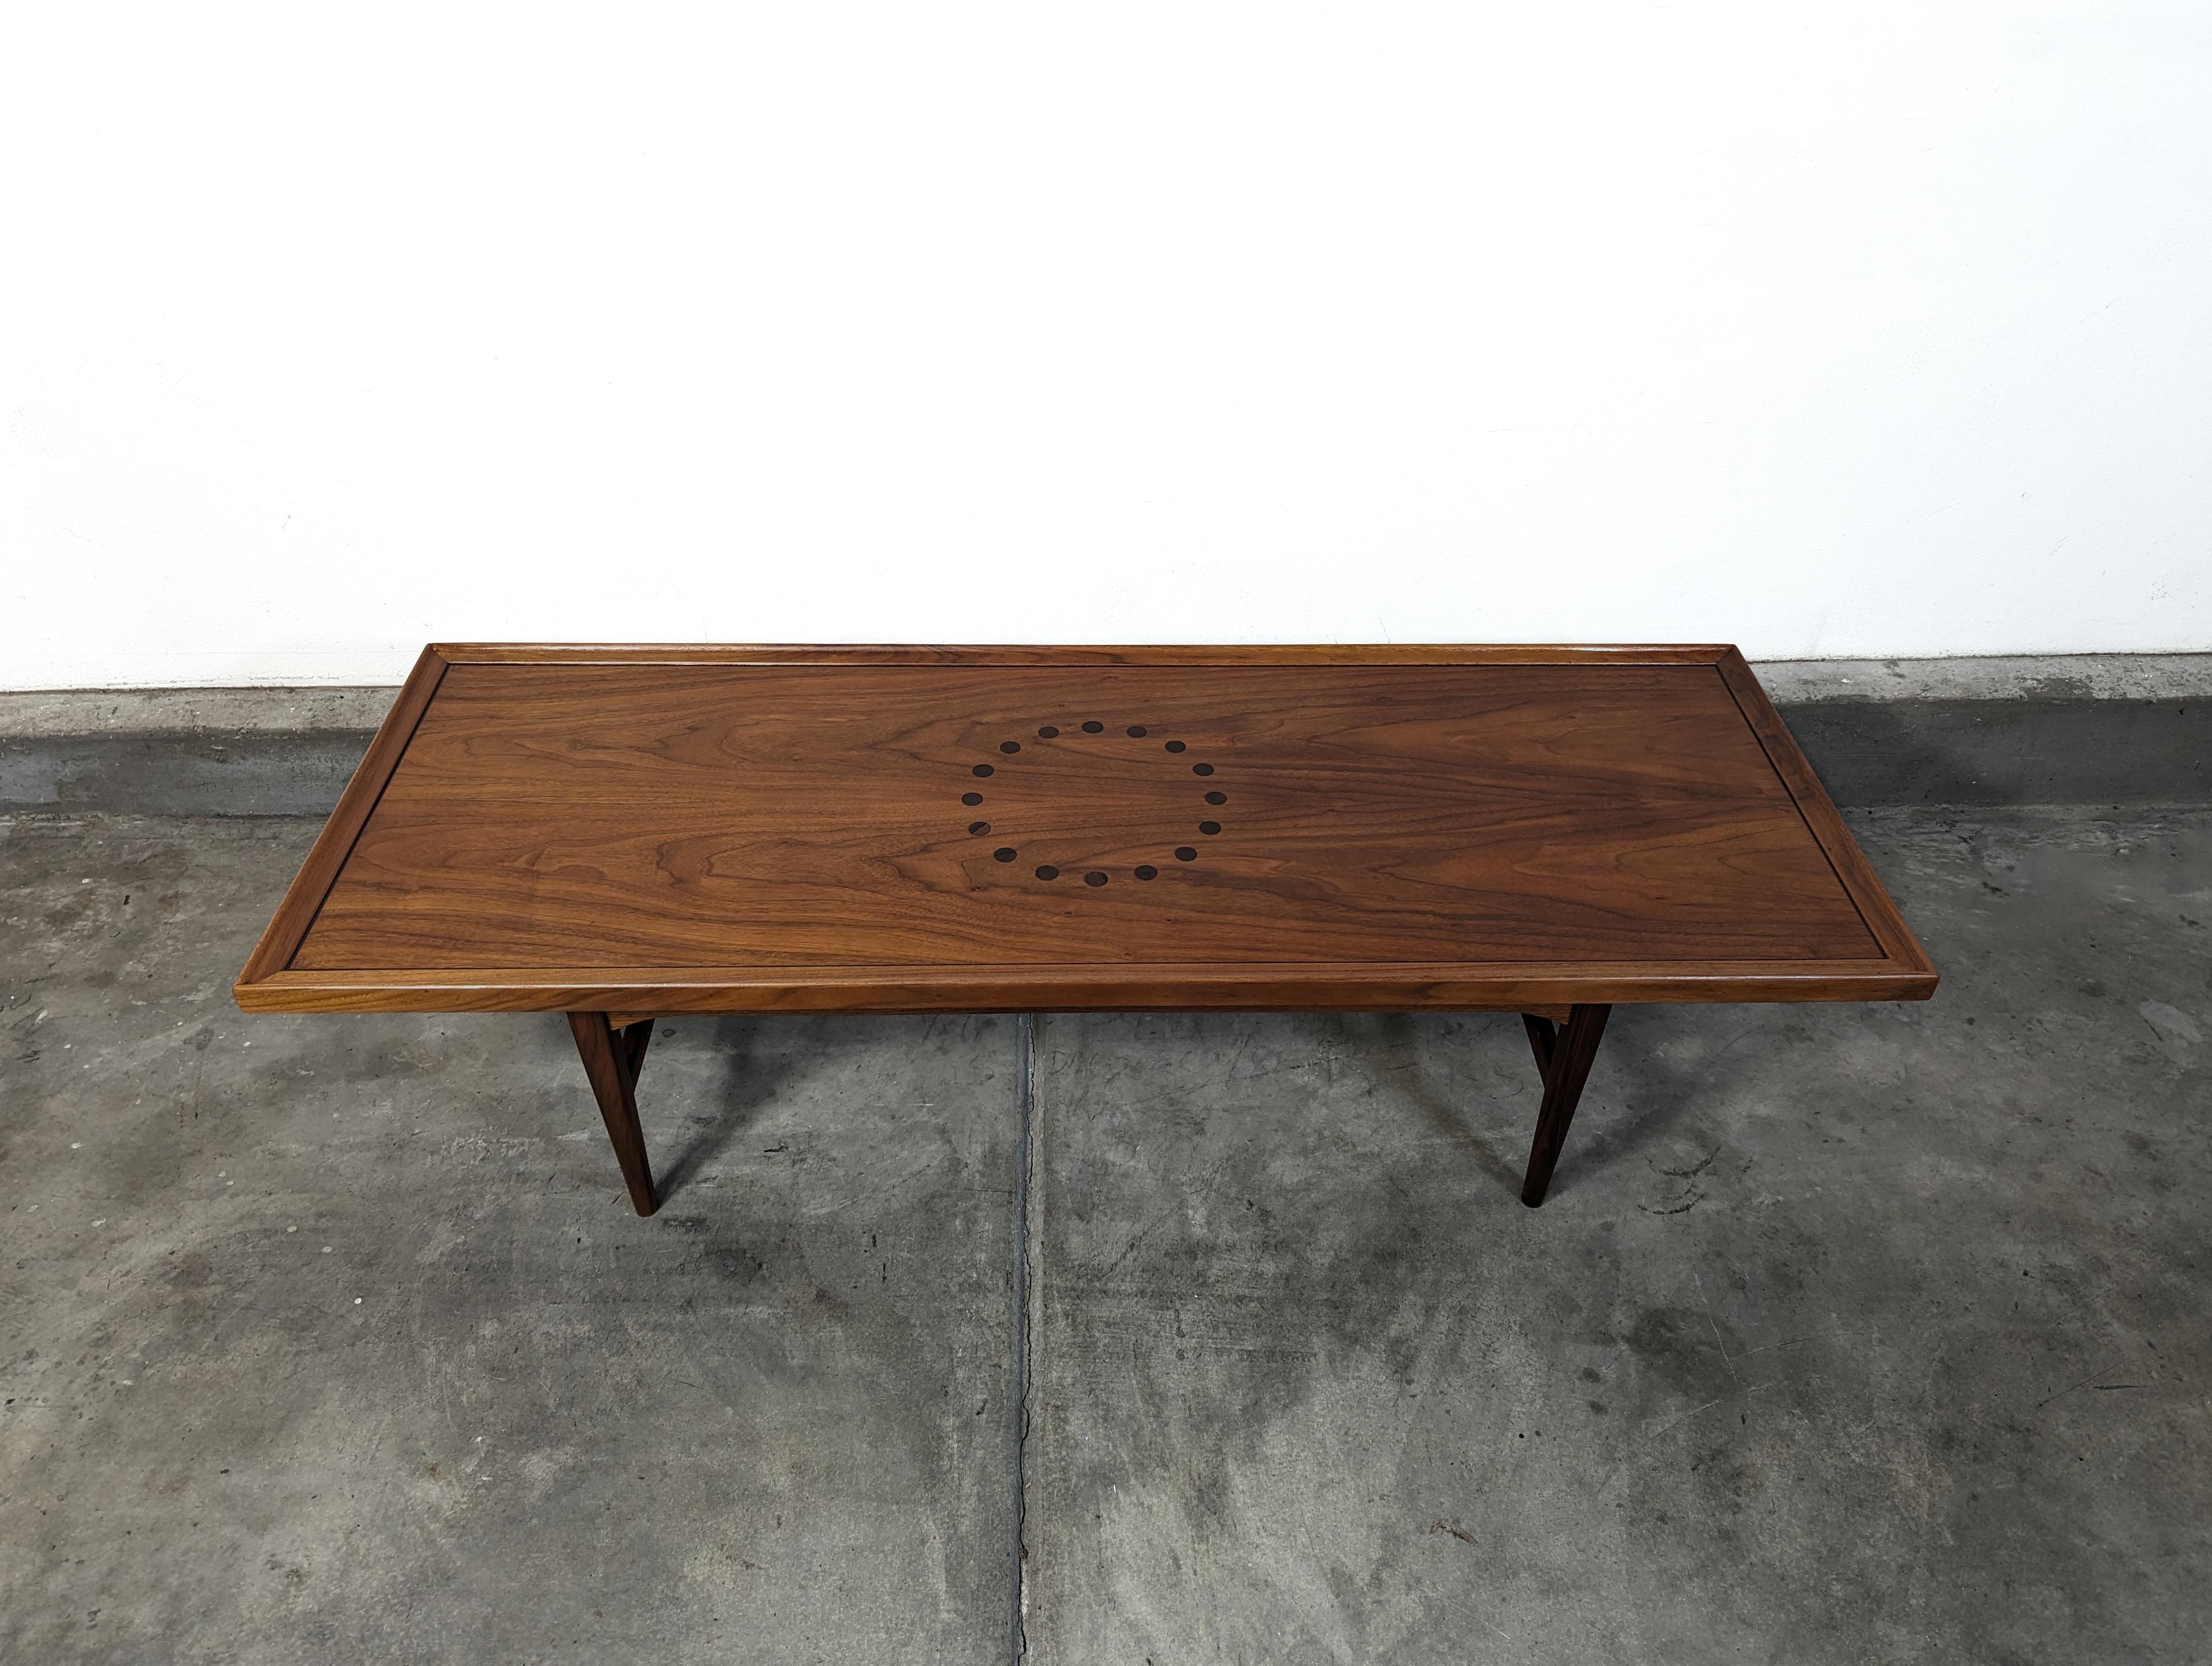 Mid-20th Century Mid Century Modern Coffee Table By Drexel, Declaration Line, c1960s For Sale